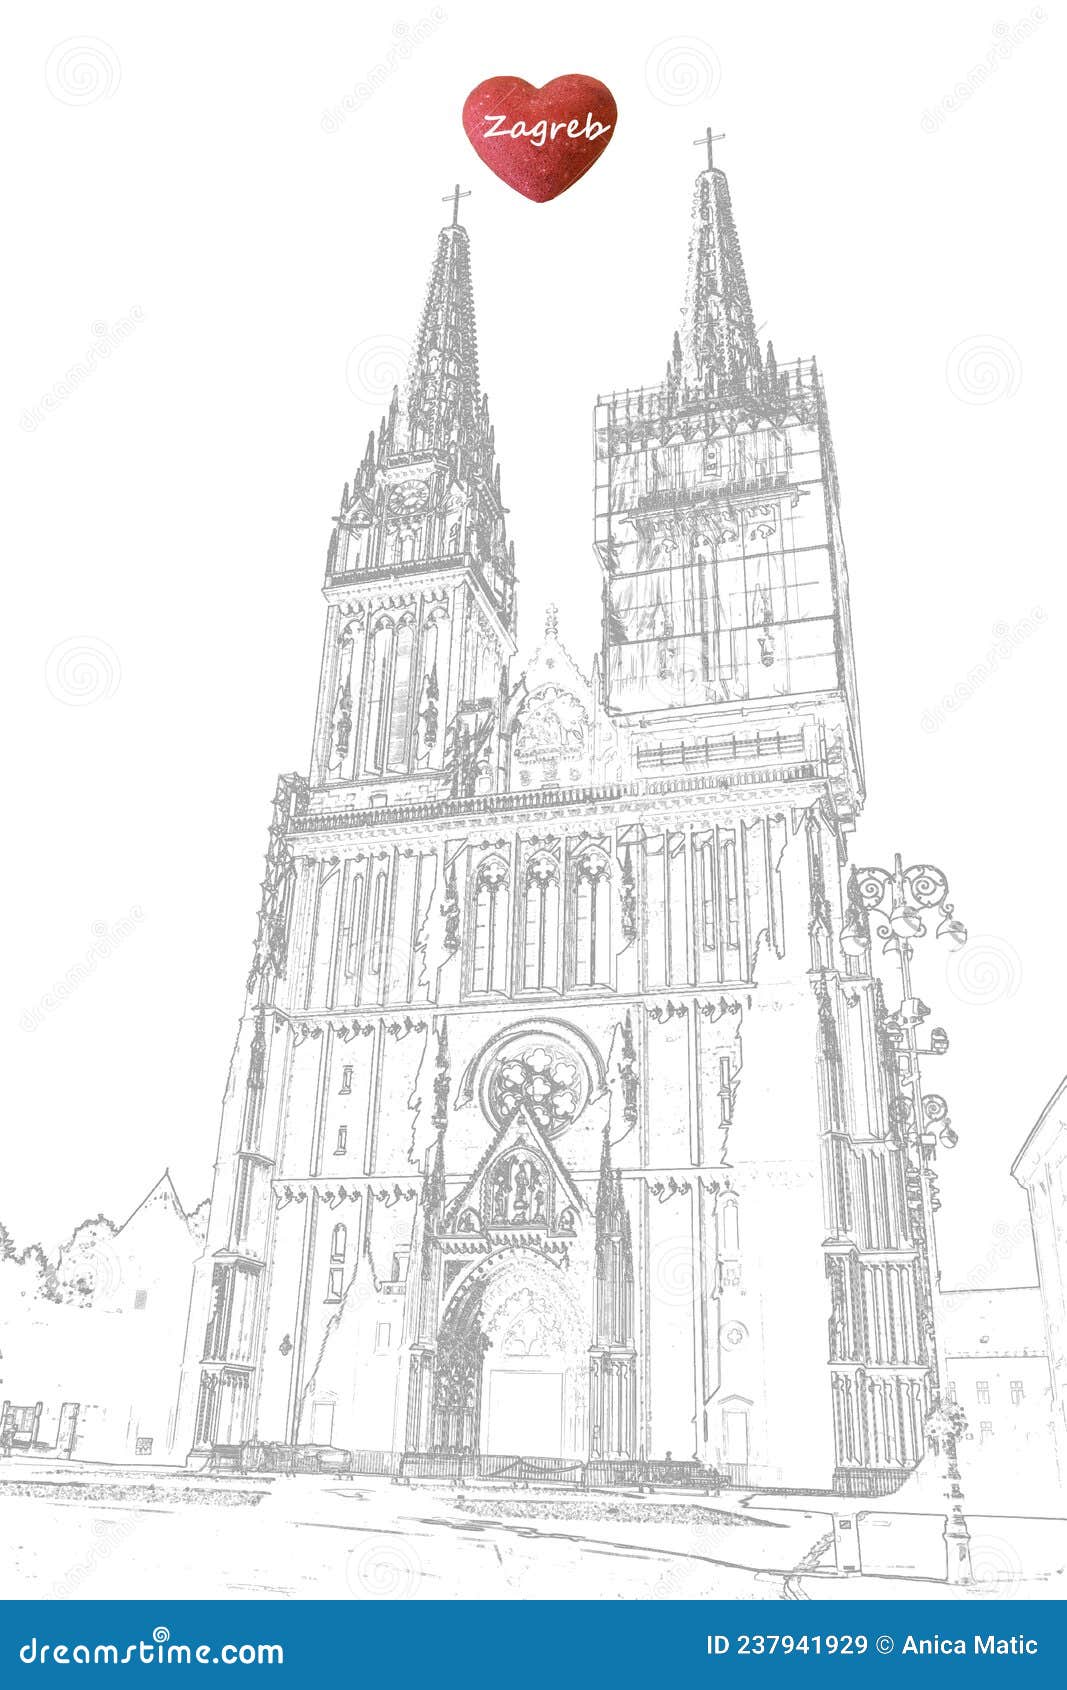 lllustration of the zagreb cathedral for which zagreb is known and recognizable.